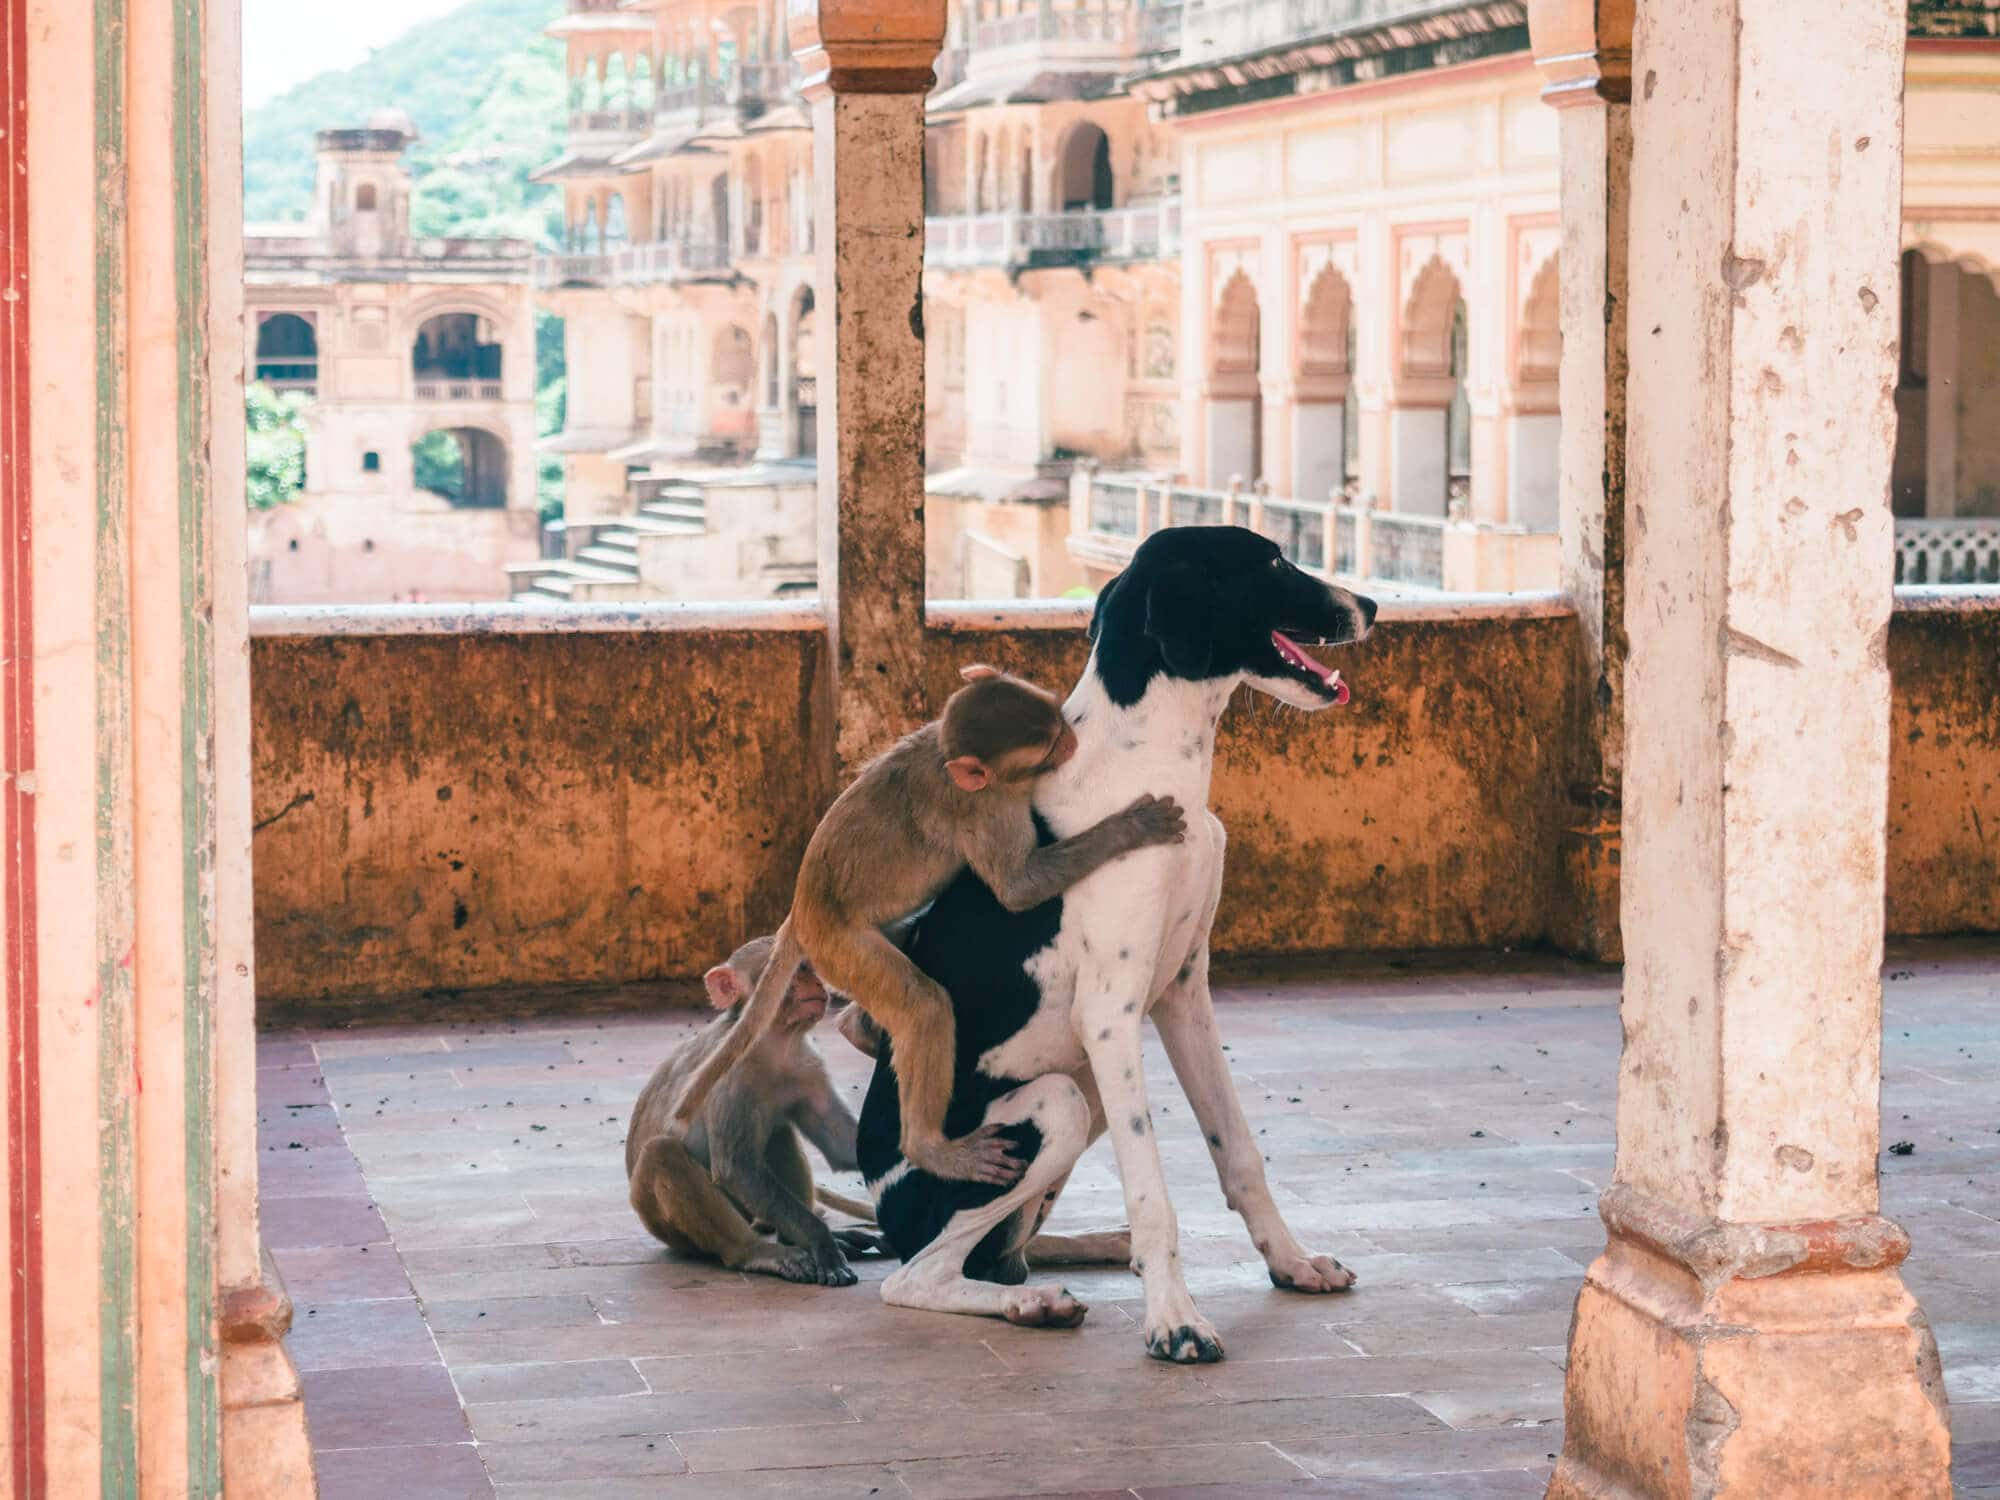 How to spend 2 days in Jaipur, India - Galtaji Monkey Temple